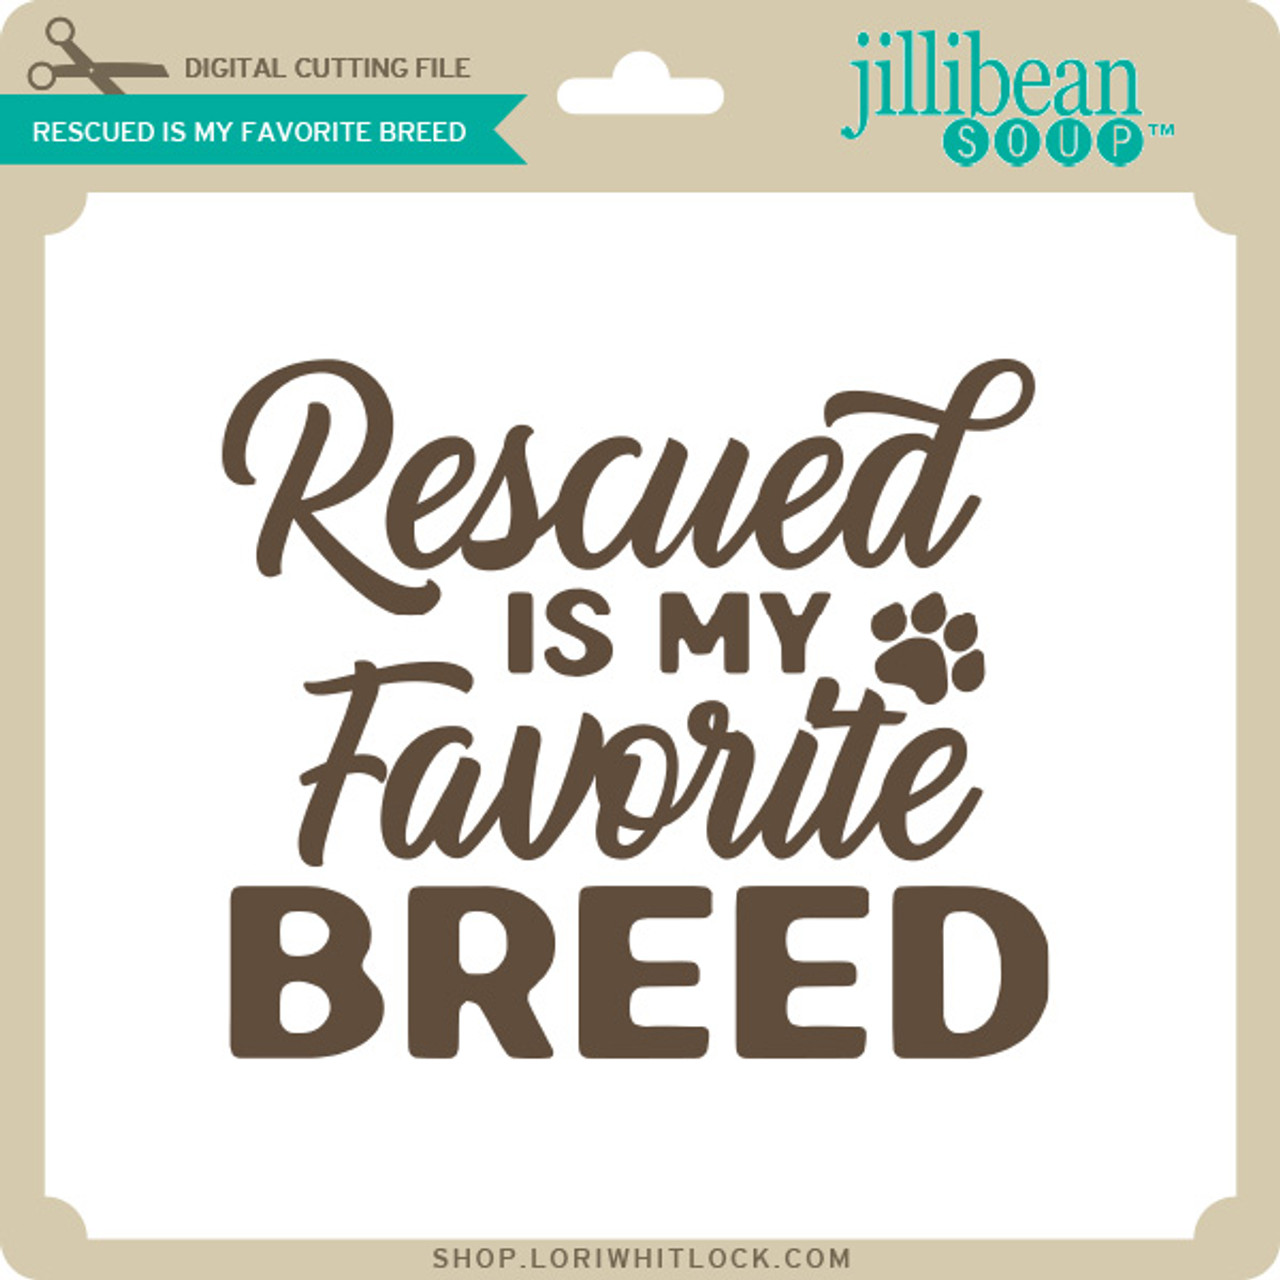 https://cdn11.bigcommerce.com/s-zlf3iiy2/images/stencil/1280x1280/products/27280/31218/JB-Rescued-is-my-favorite-breed__39853.1694470052.jpg?c=2